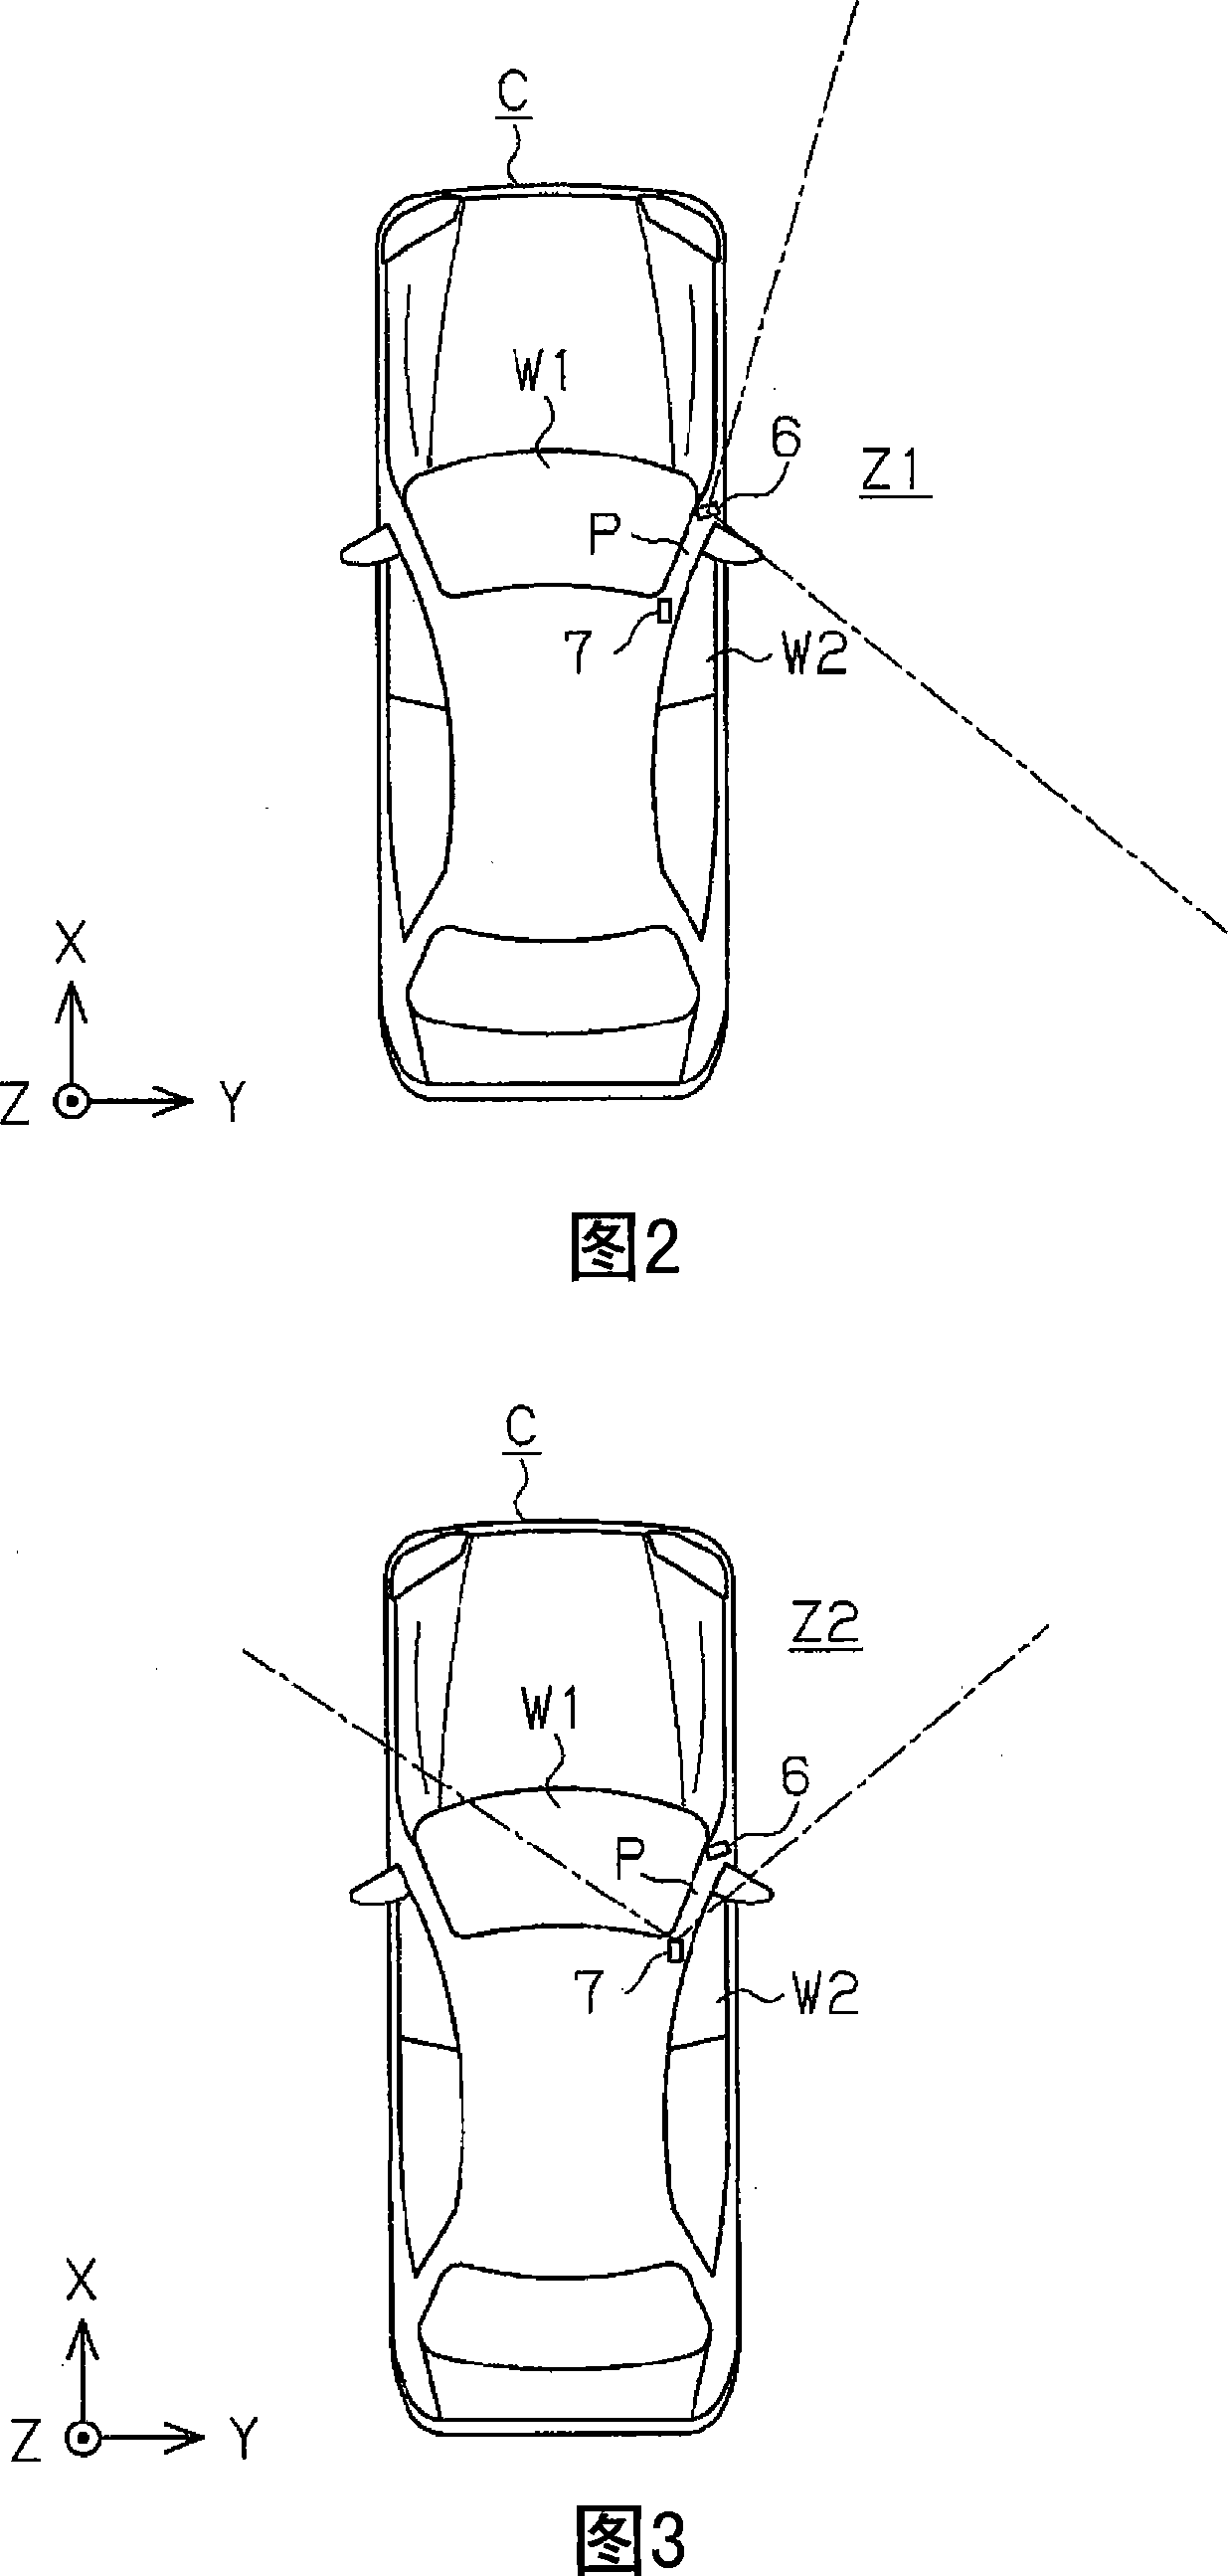 Driving support method and apparatus